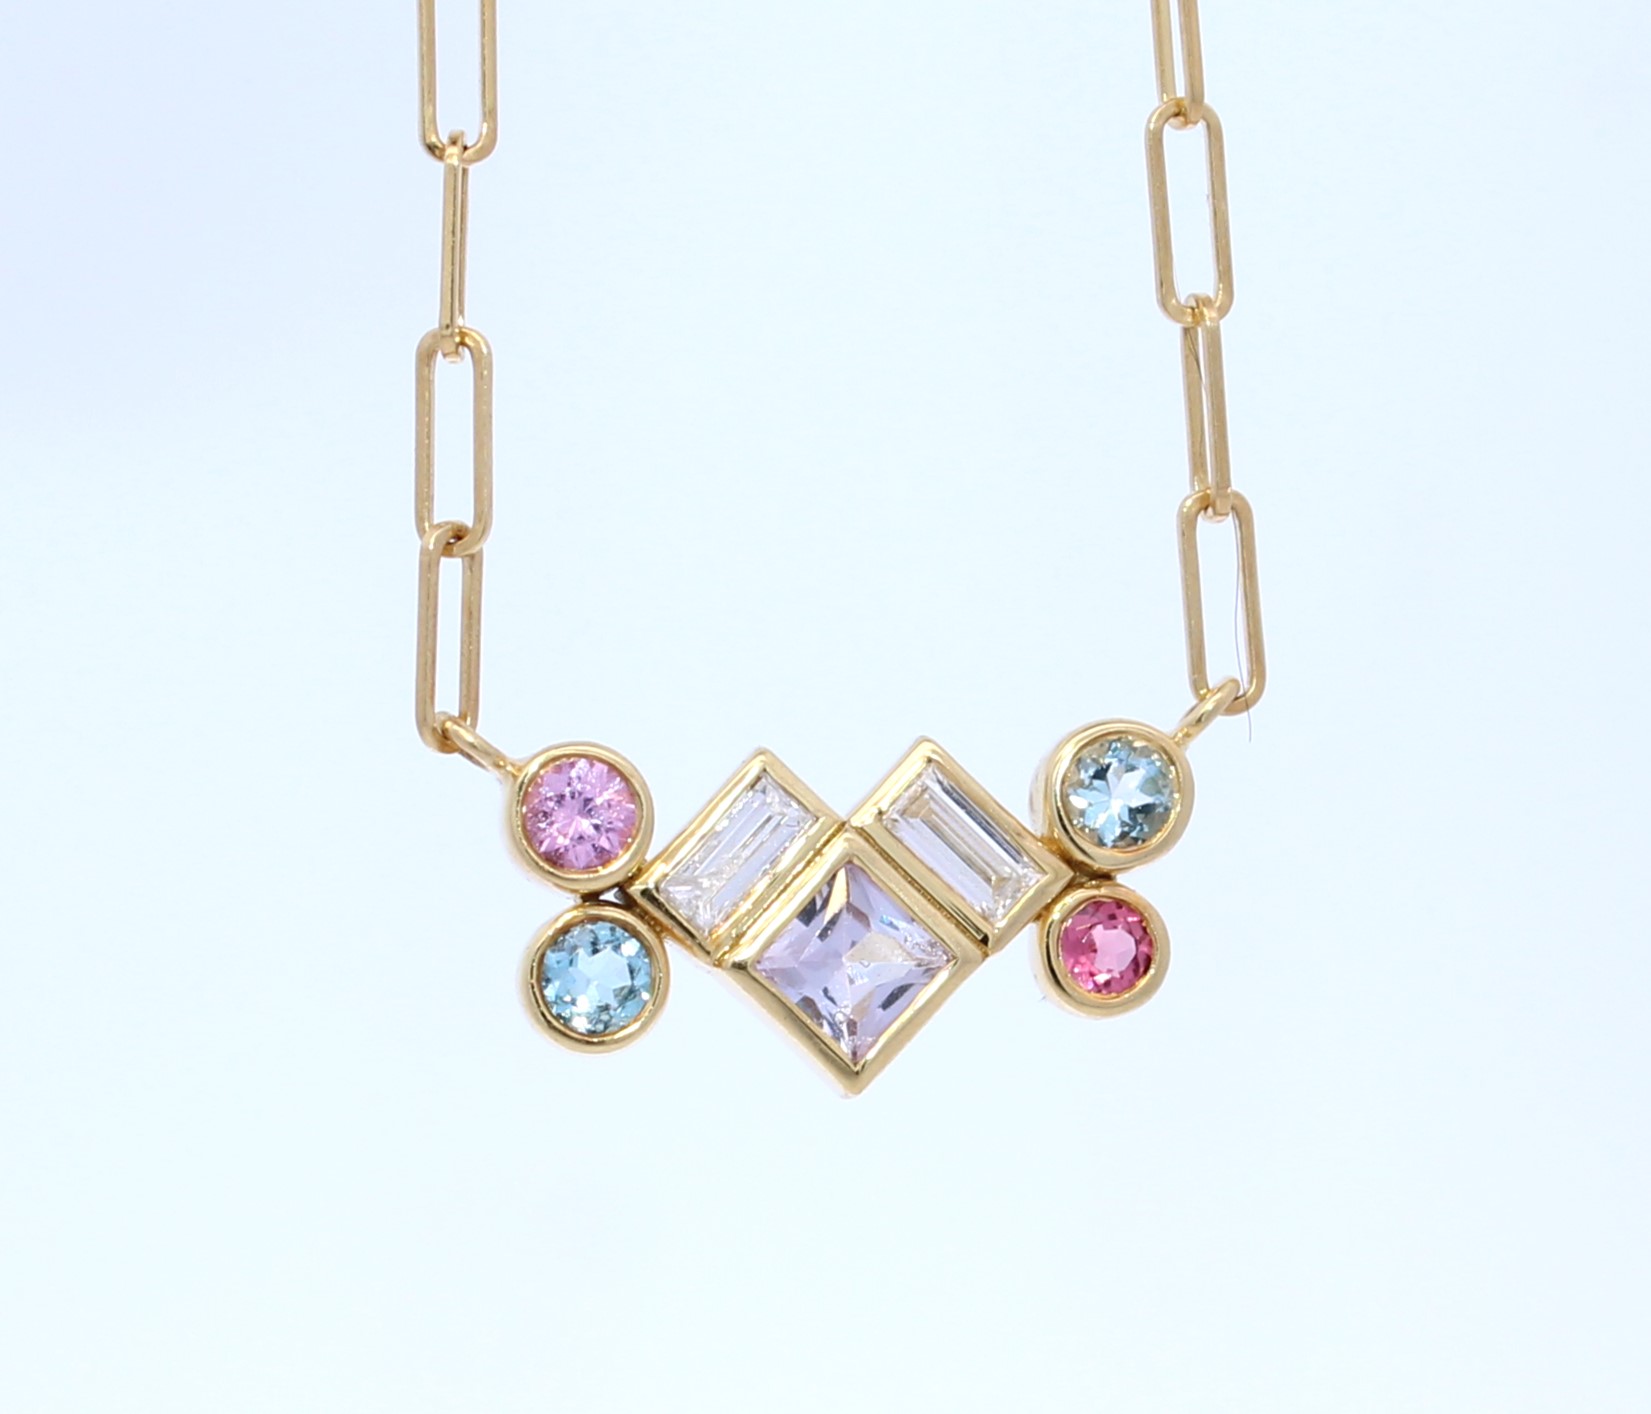 Lauren K 18 Karat Yellow Gold Aquamarine  Pink Tourmaline  Pale Pink Spinel And Diamond Necklace From The Bubble Bea Collection 18 Inches Long